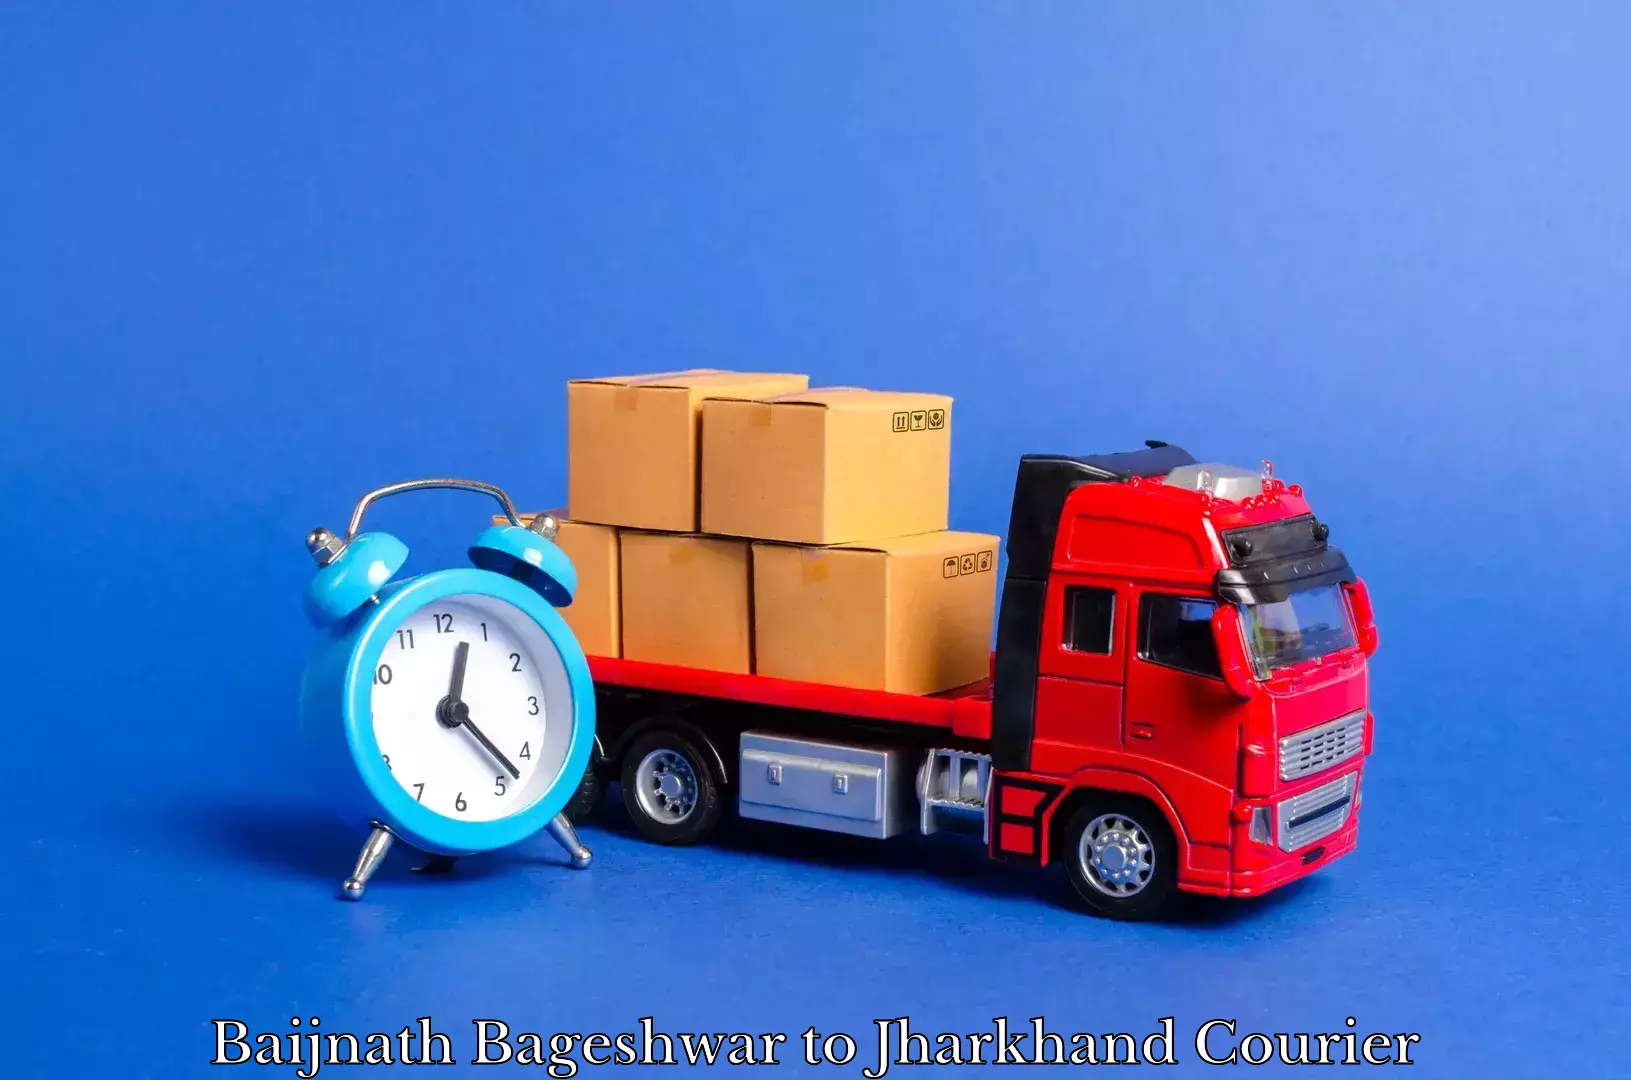 Quality relocation assistance Baijnath Bageshwar to Jharkhand